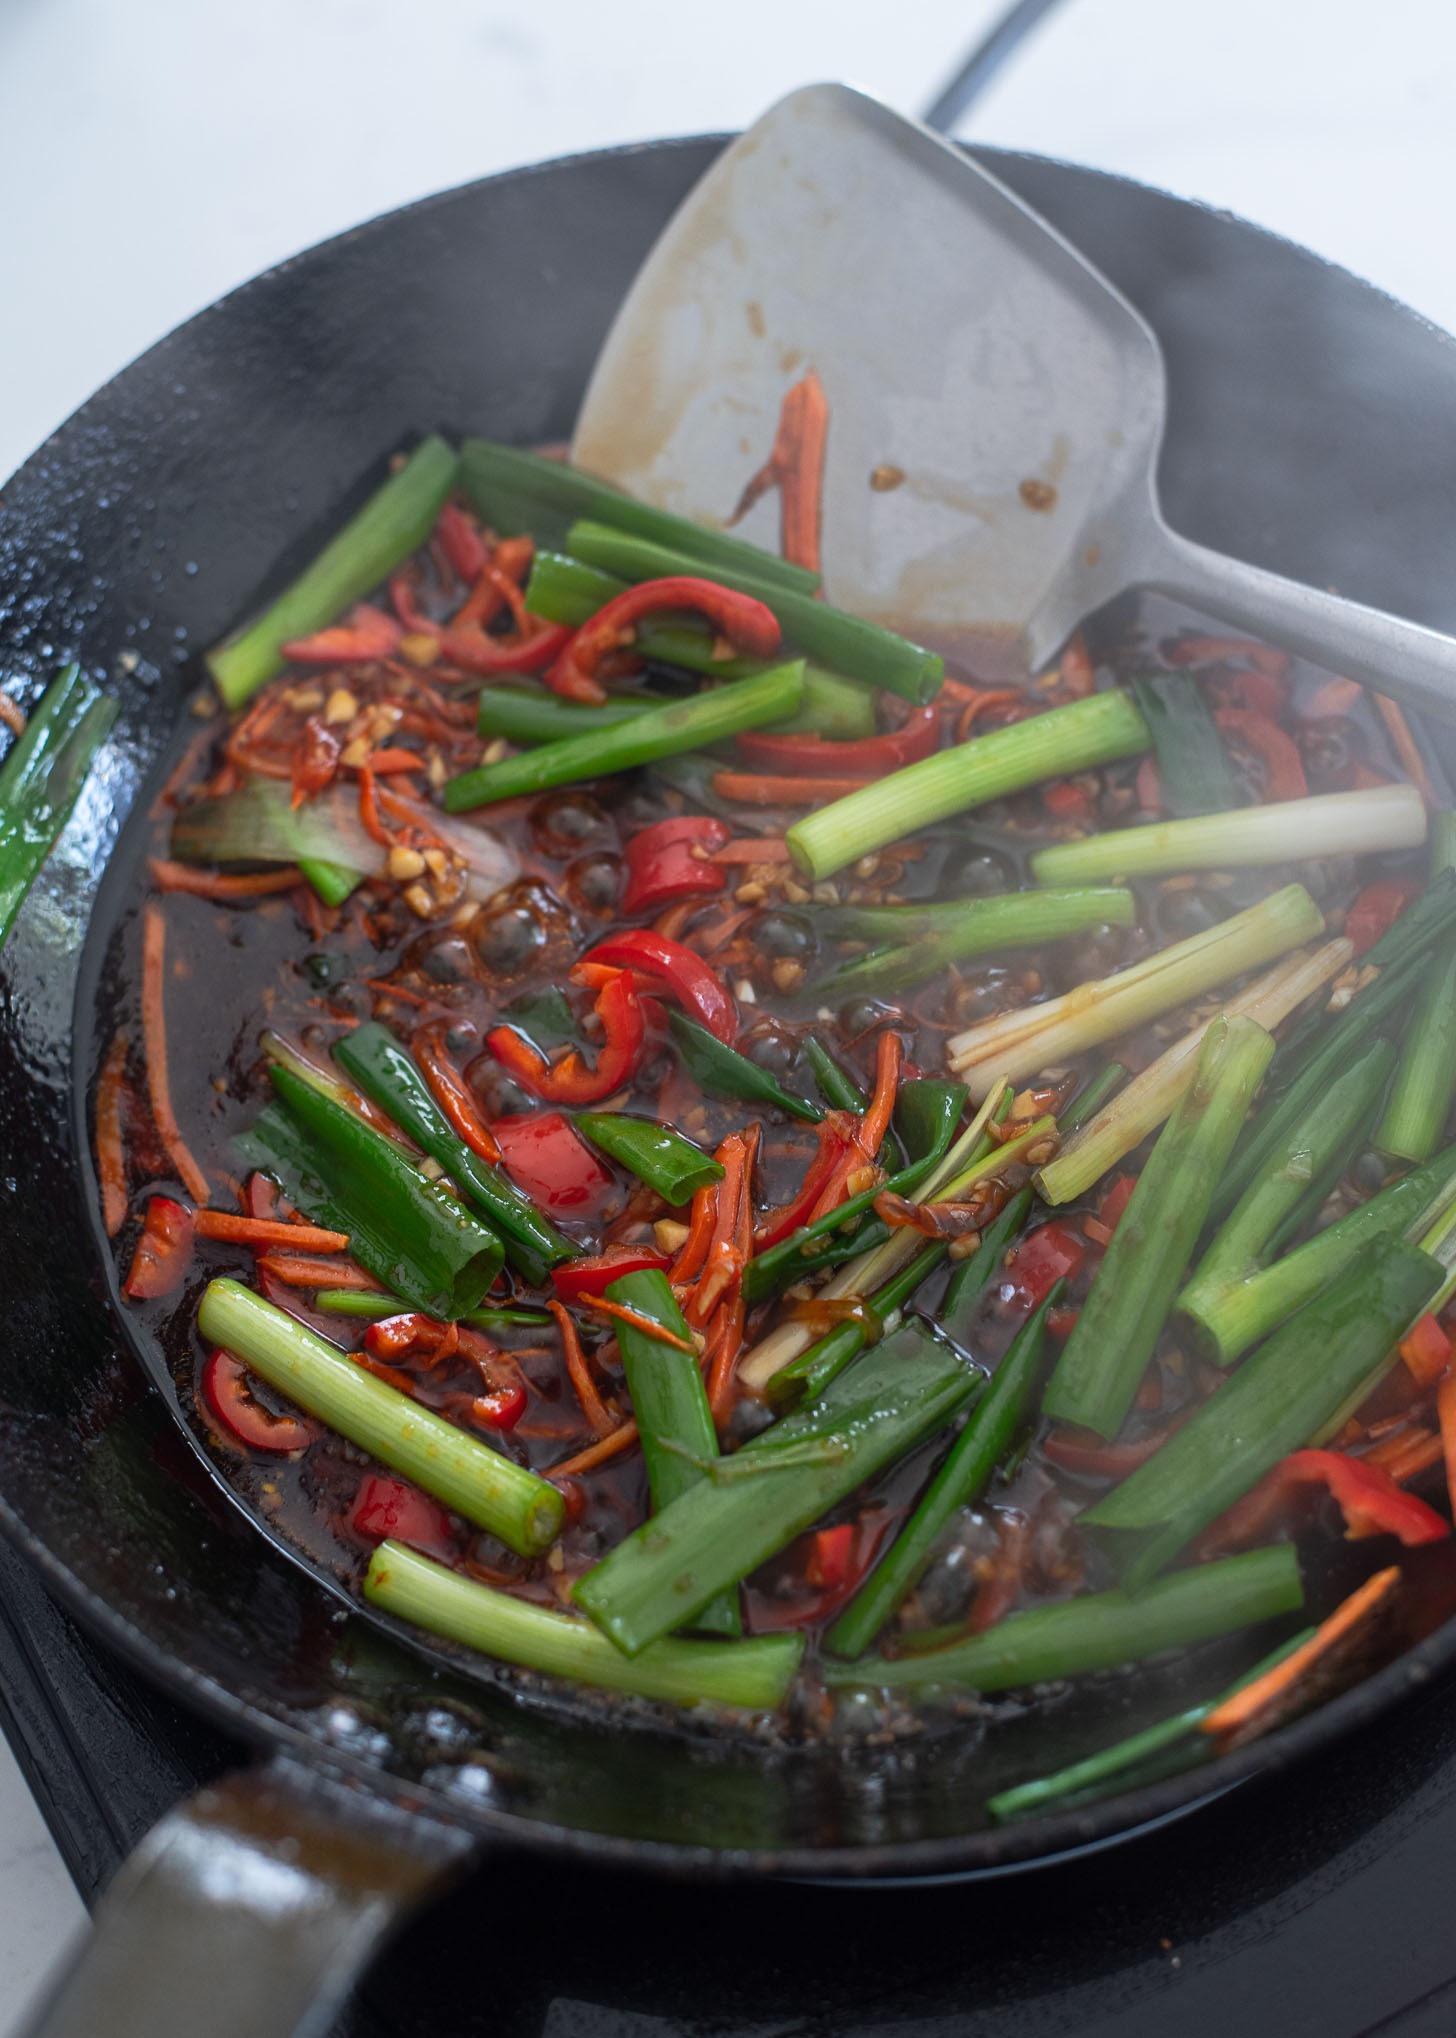 Green onion and crispy beef sauce are added to the skillet.